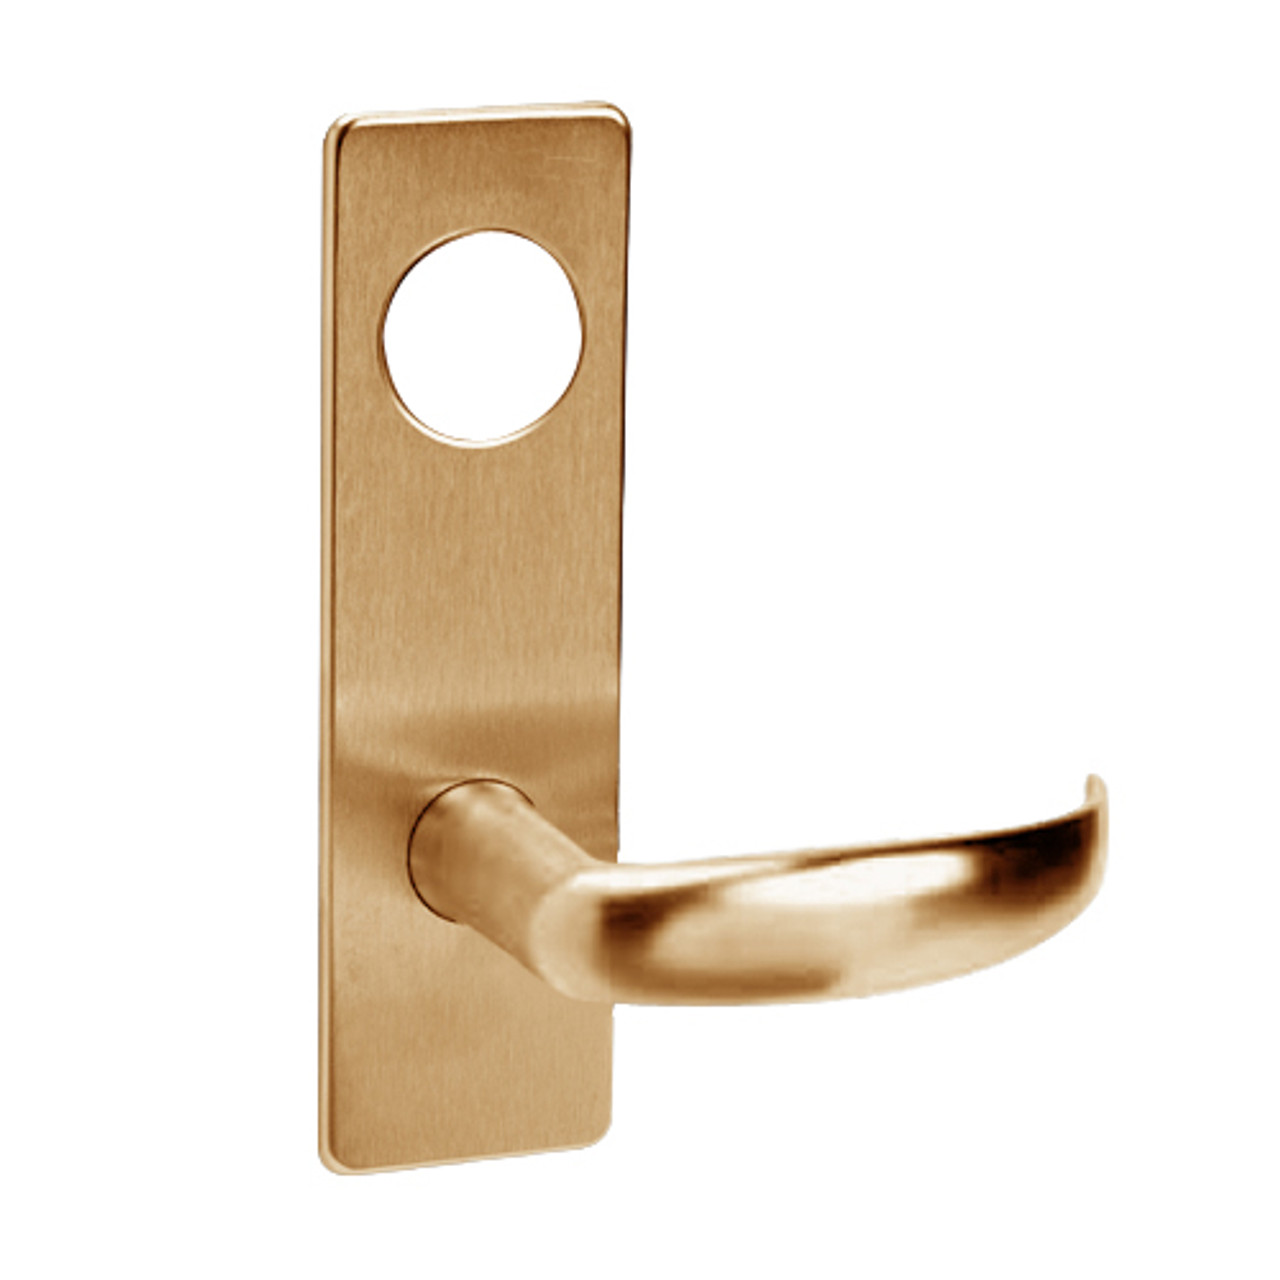 ML2069-PSP-612-LC Corbin Russwin ML2000 Series Mortise Institution Privacy Locksets with Princeton Lever in Satin Bronze